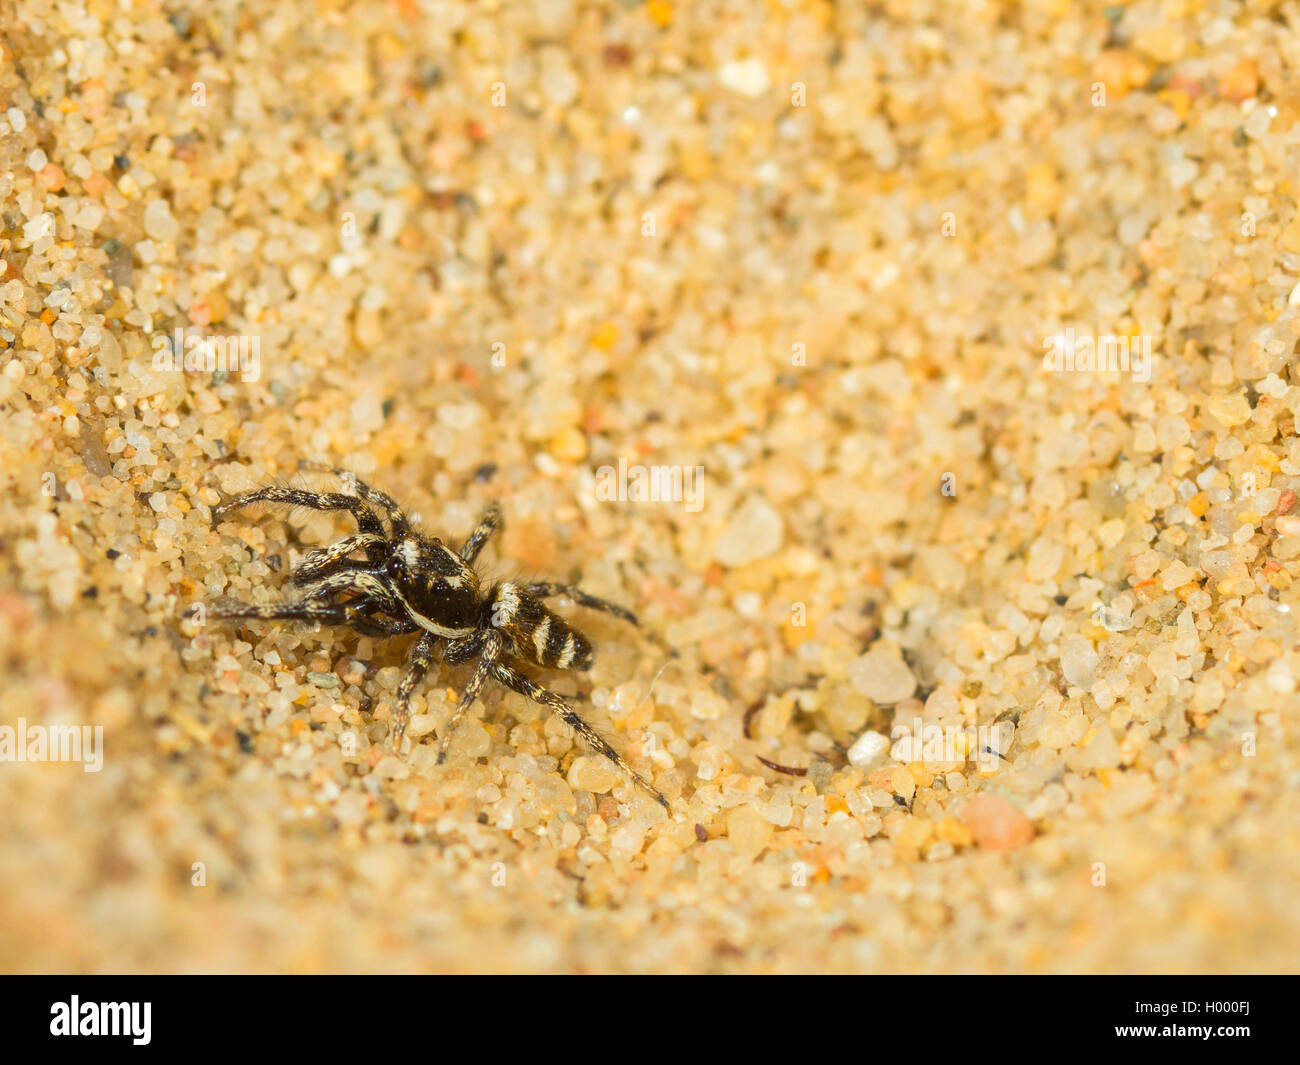 European antlion (Euroleon nostras), Captured Zebra Spider (Salticus scenicus) trying to flee out of the conical pit, Germany Stock Photo